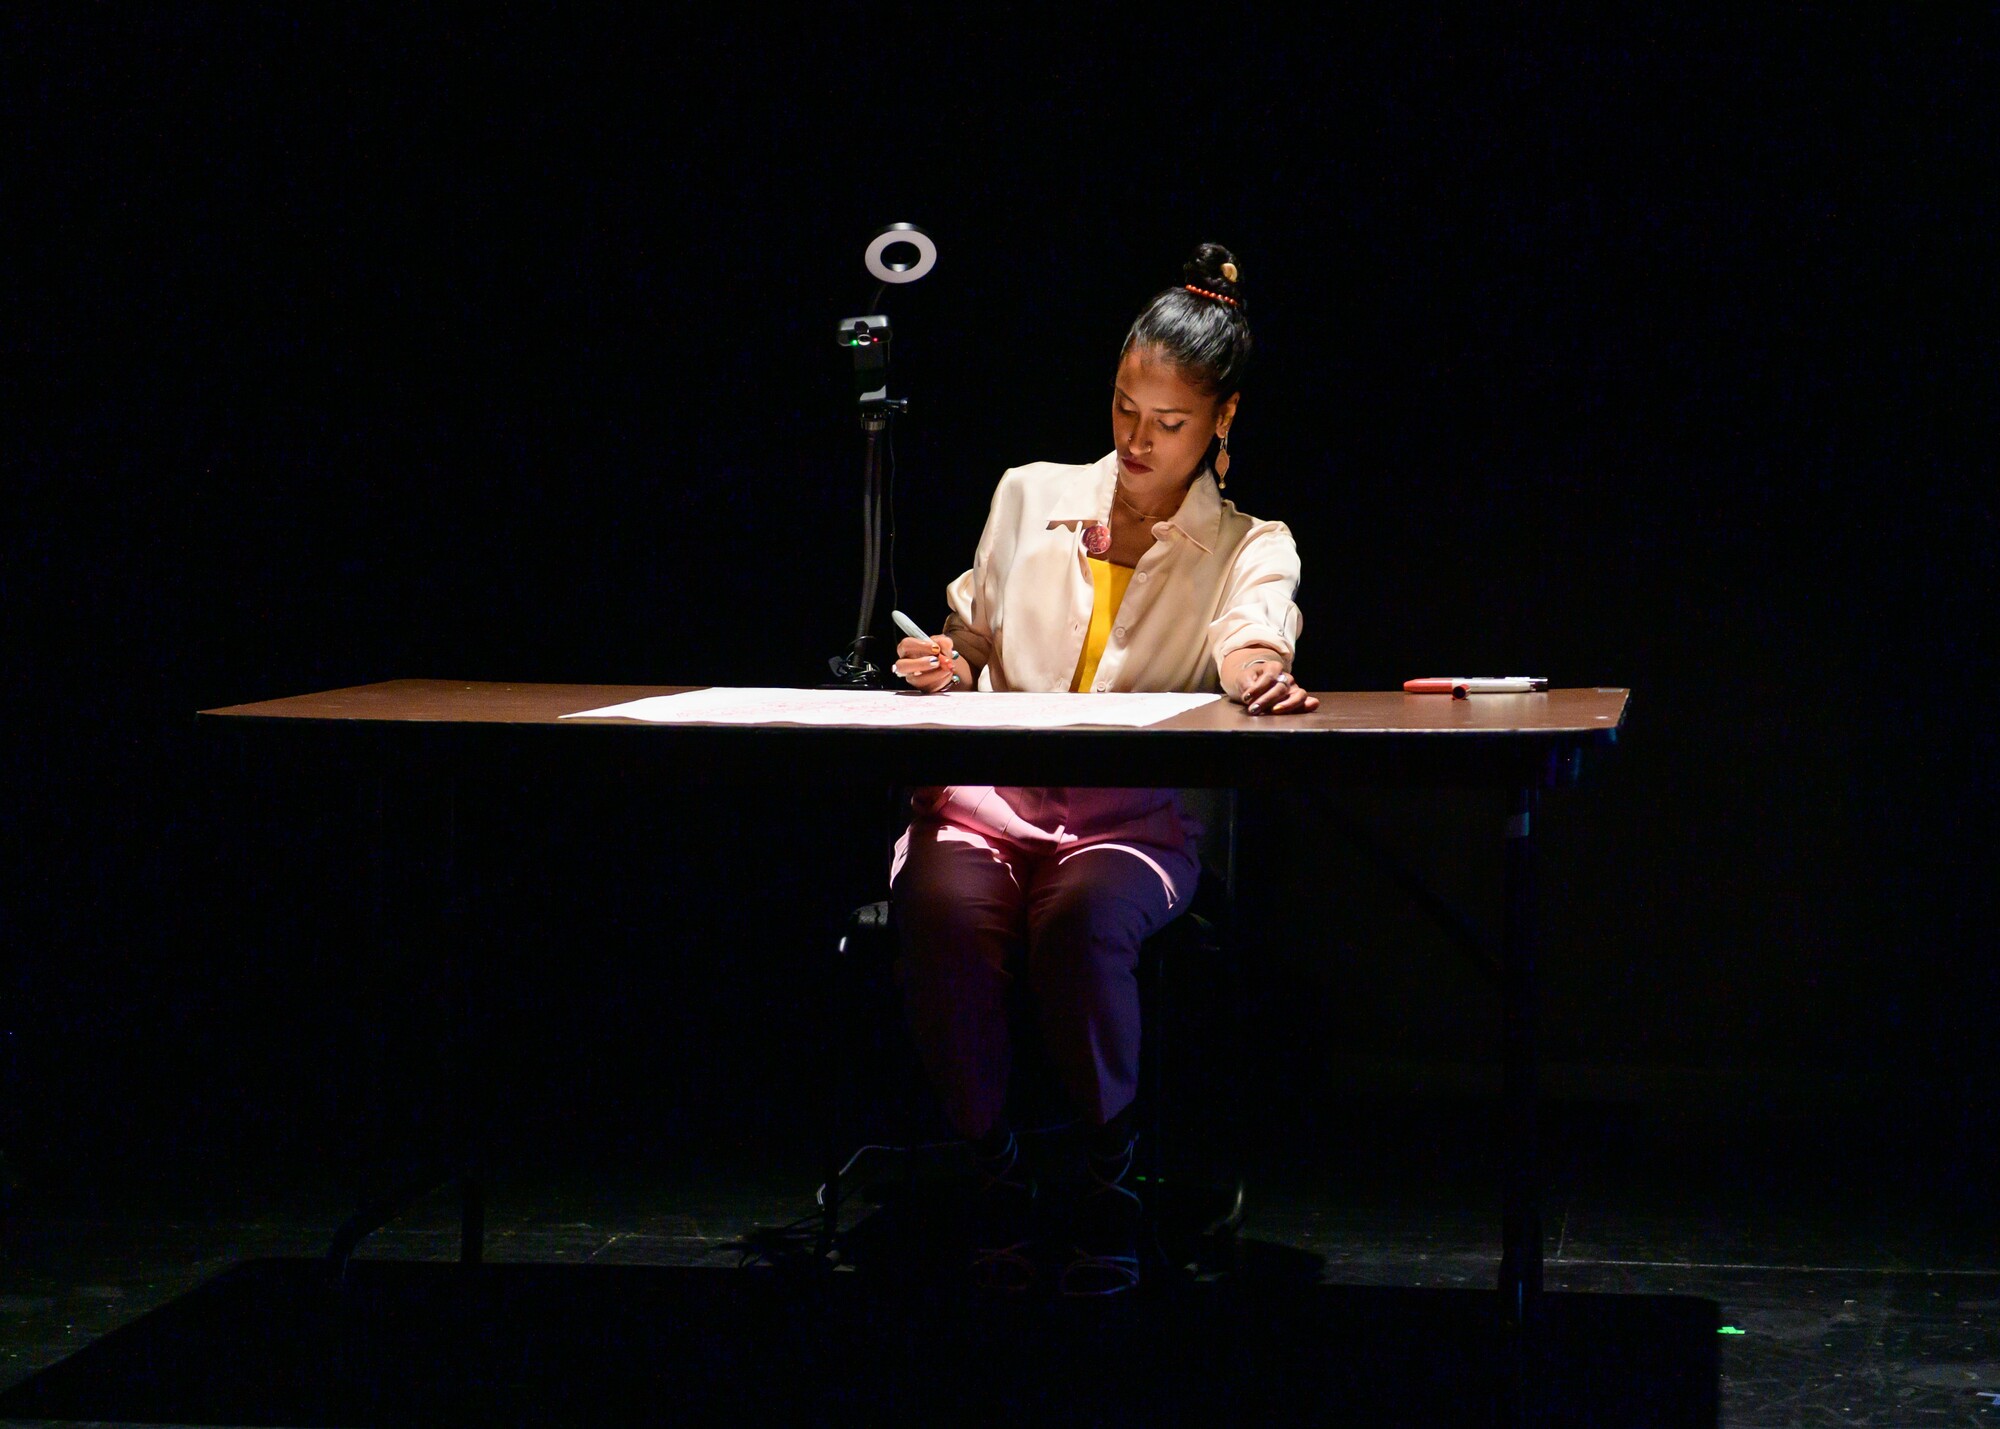 A woman sits at a desk and writes on-stage.